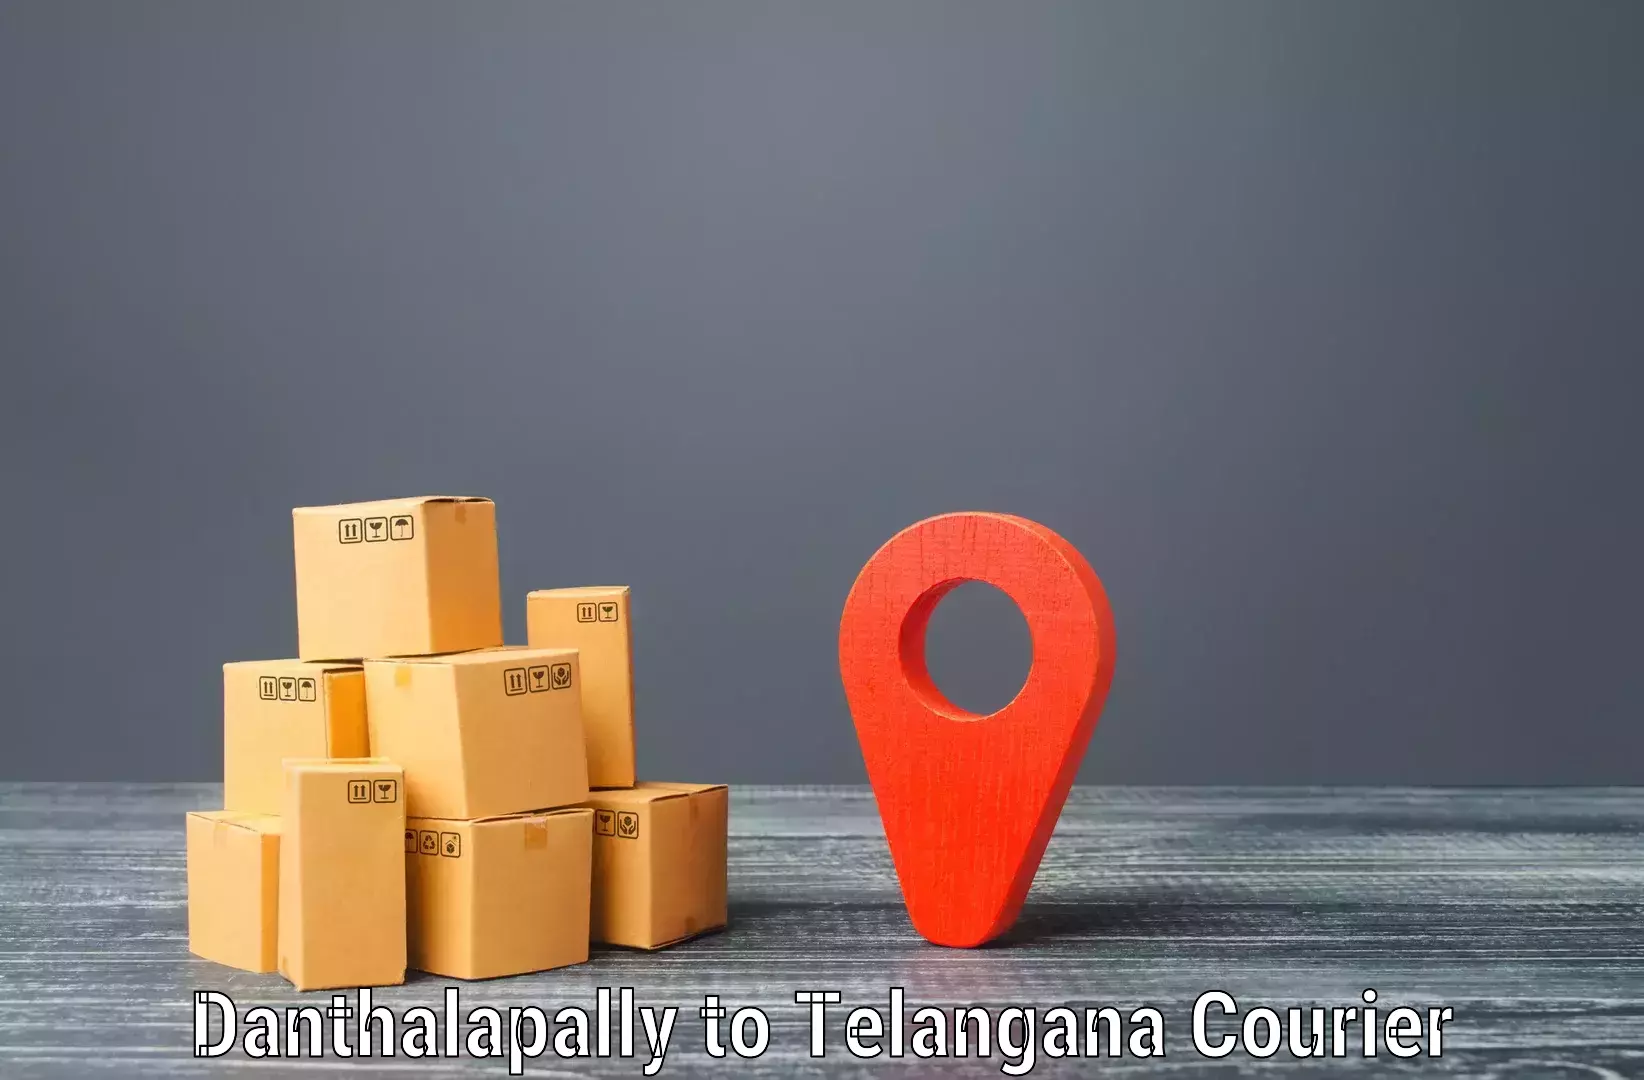 Package delivery network Danthalapally to Zaheerabad